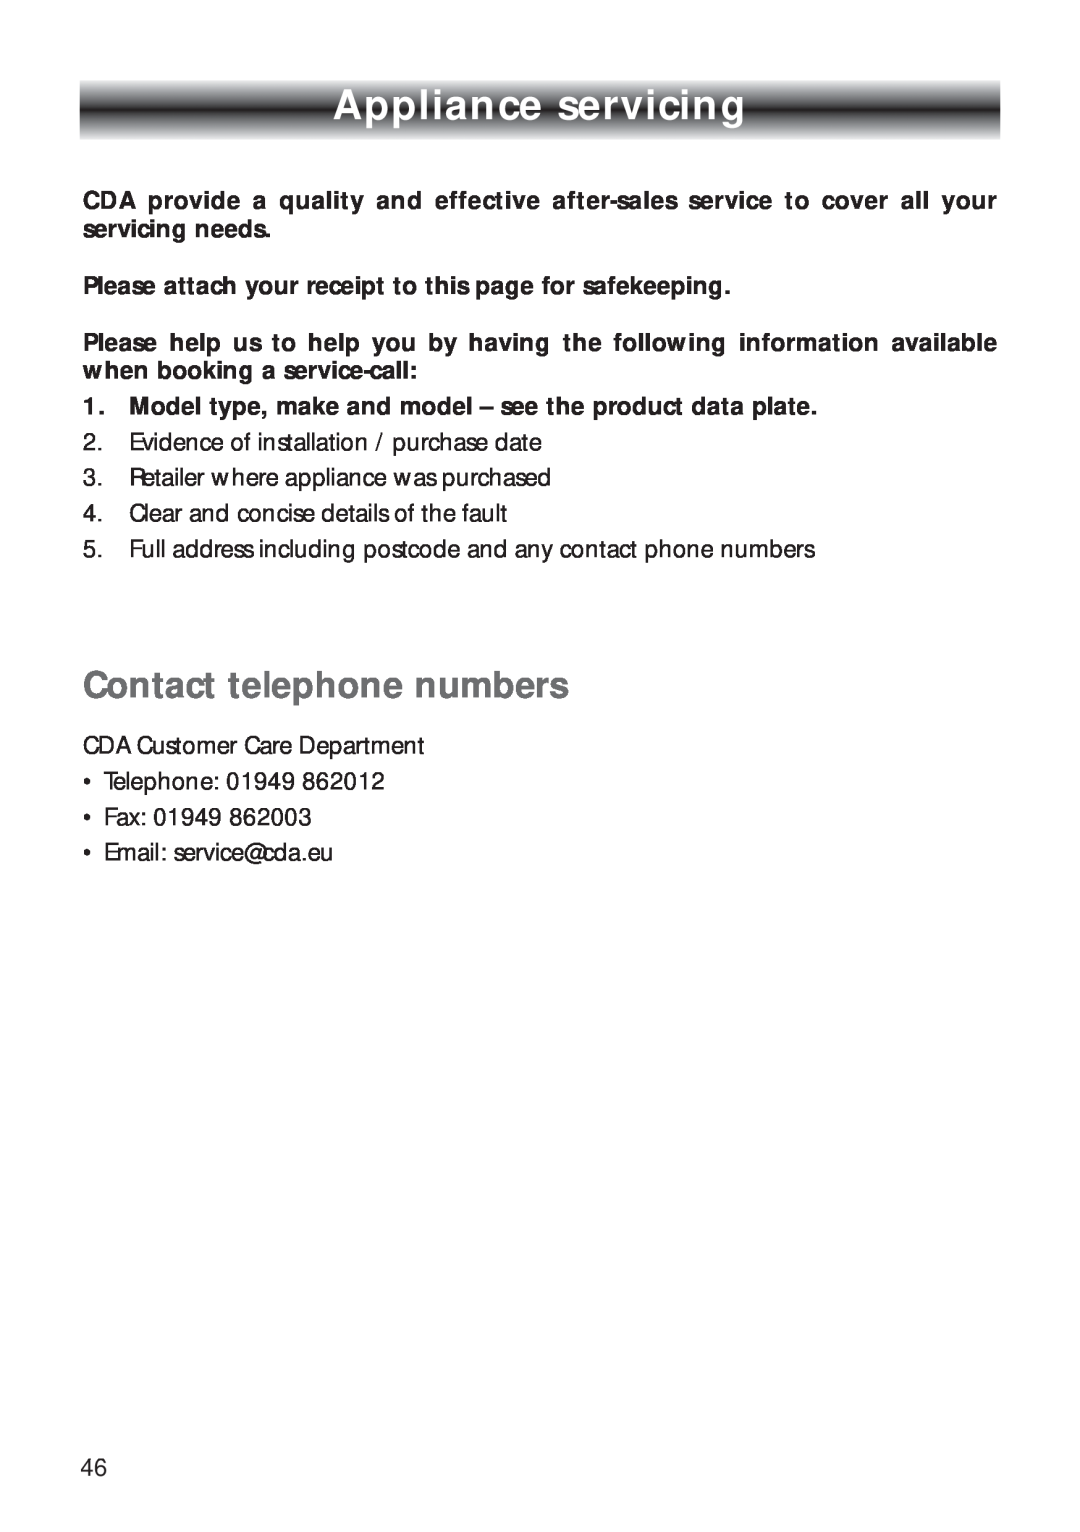 CDA RV 700 installation instructions Appliance servicing, Contact telephone numbers 